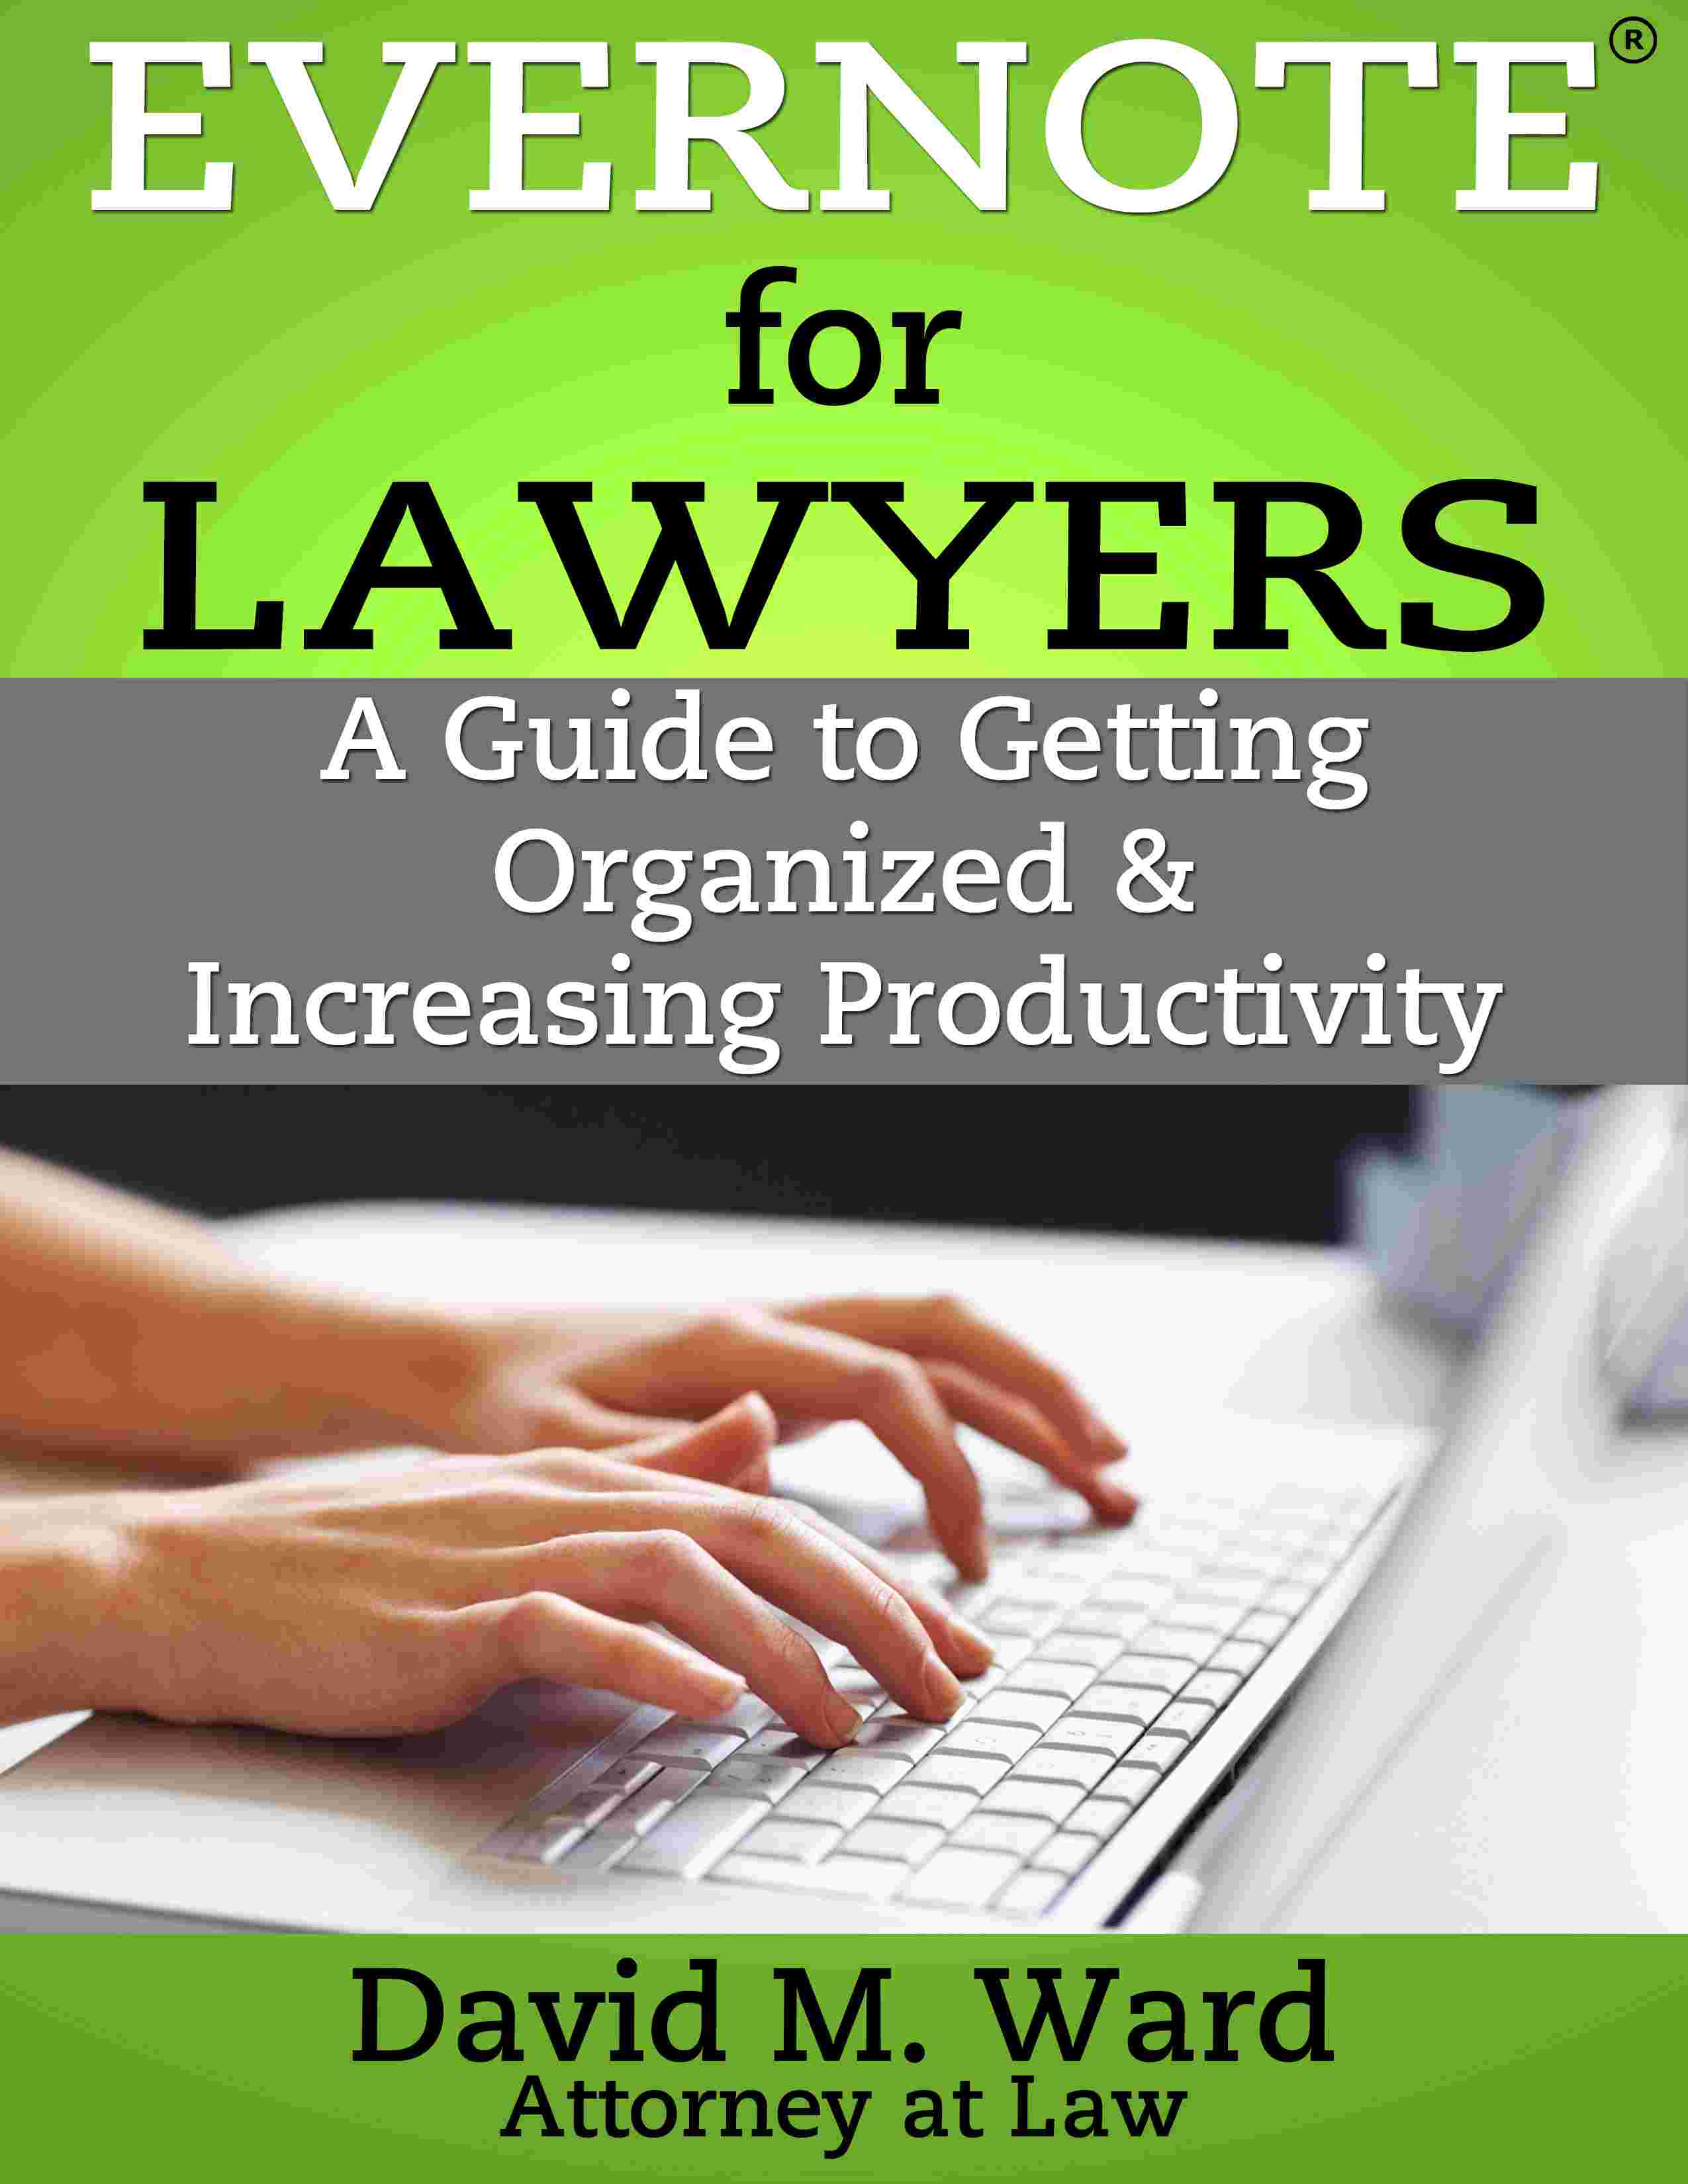 Evernote for Lawyers: A Guide to Getting Organized & Increasing Productivity